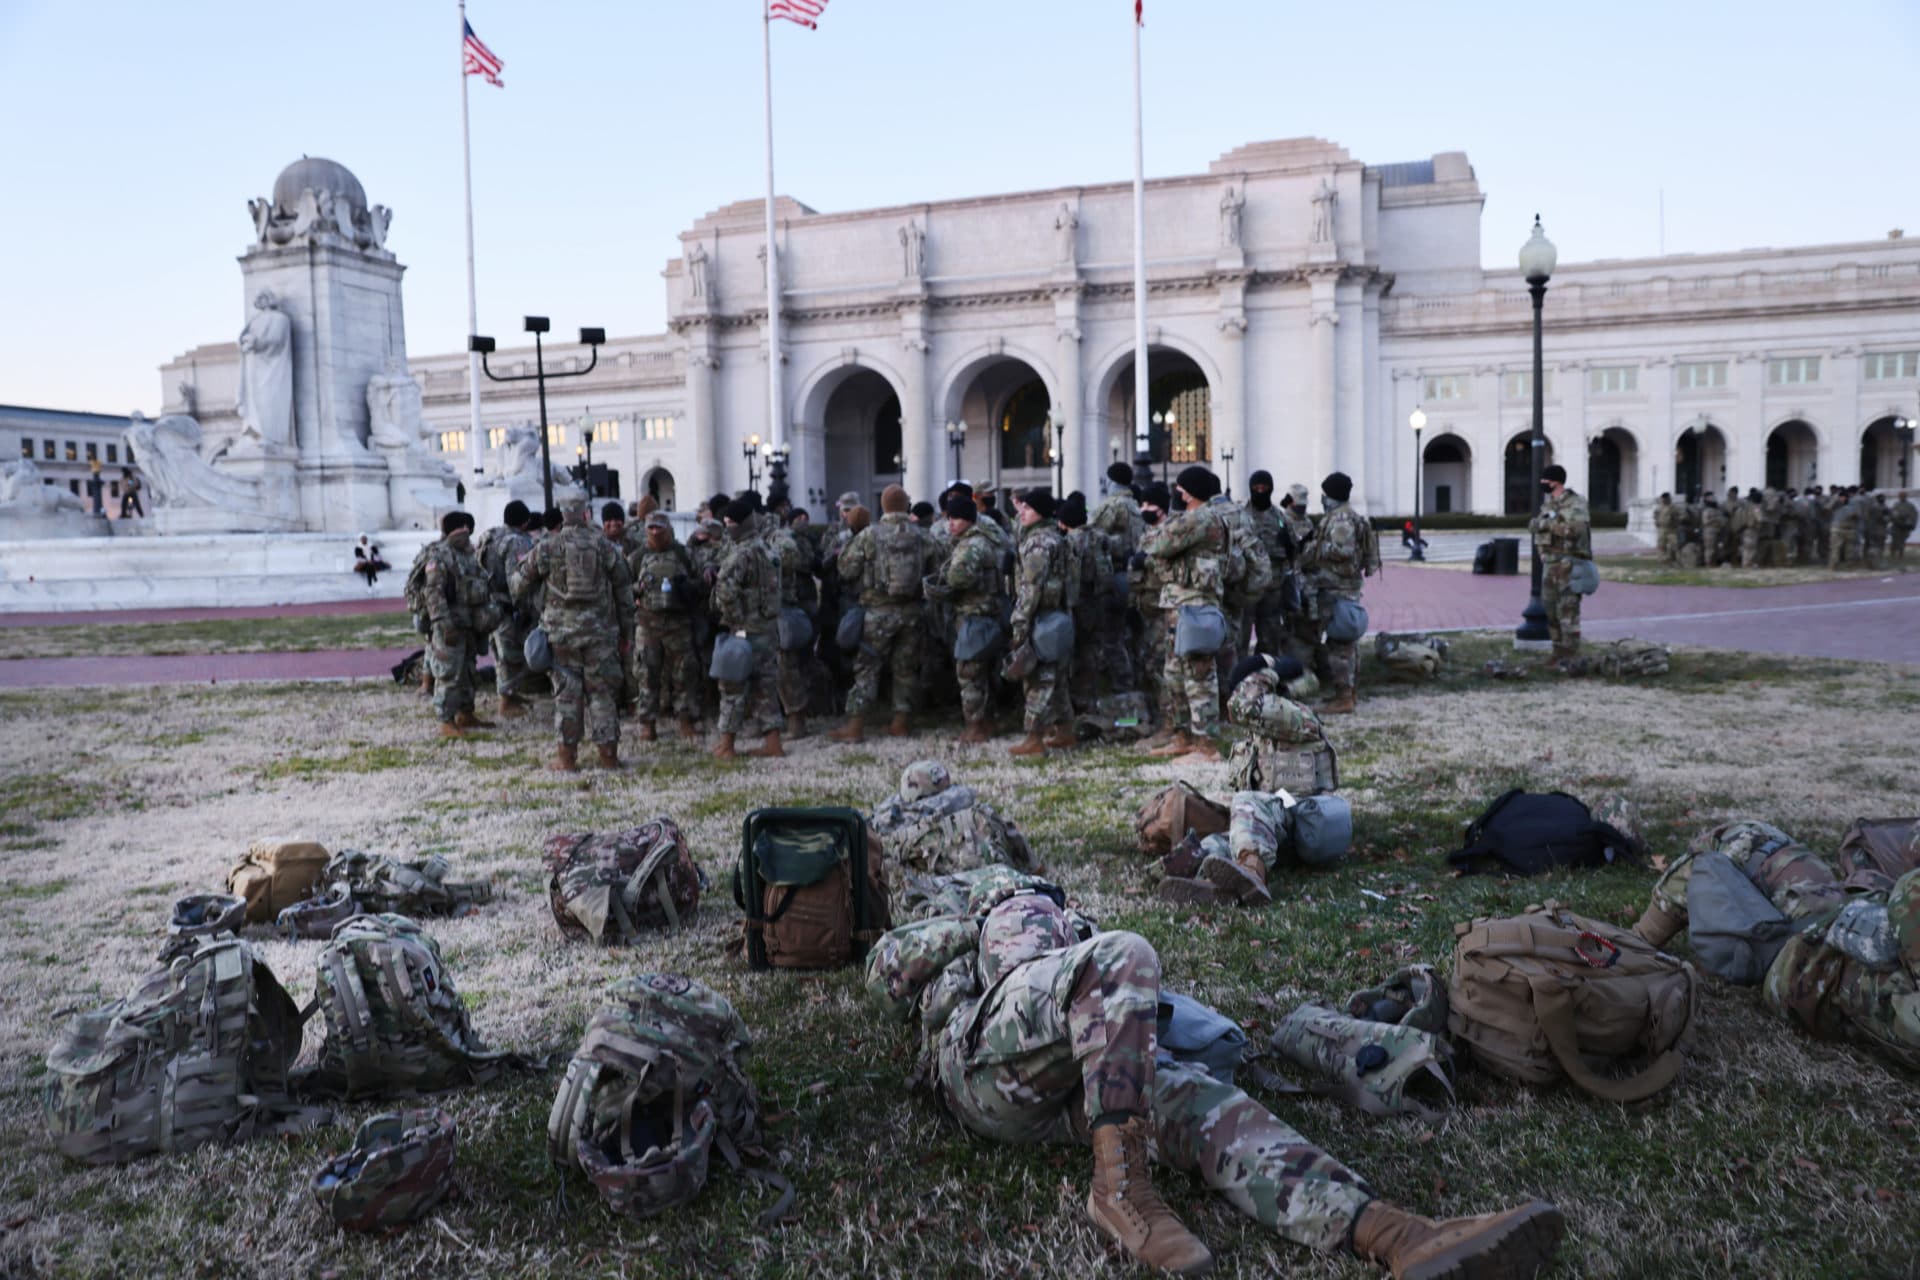 Members of the National Guard wait to depart Union Station as the city remains under tight security on Inauguration Day. (Spencer Platt/Getty Images)